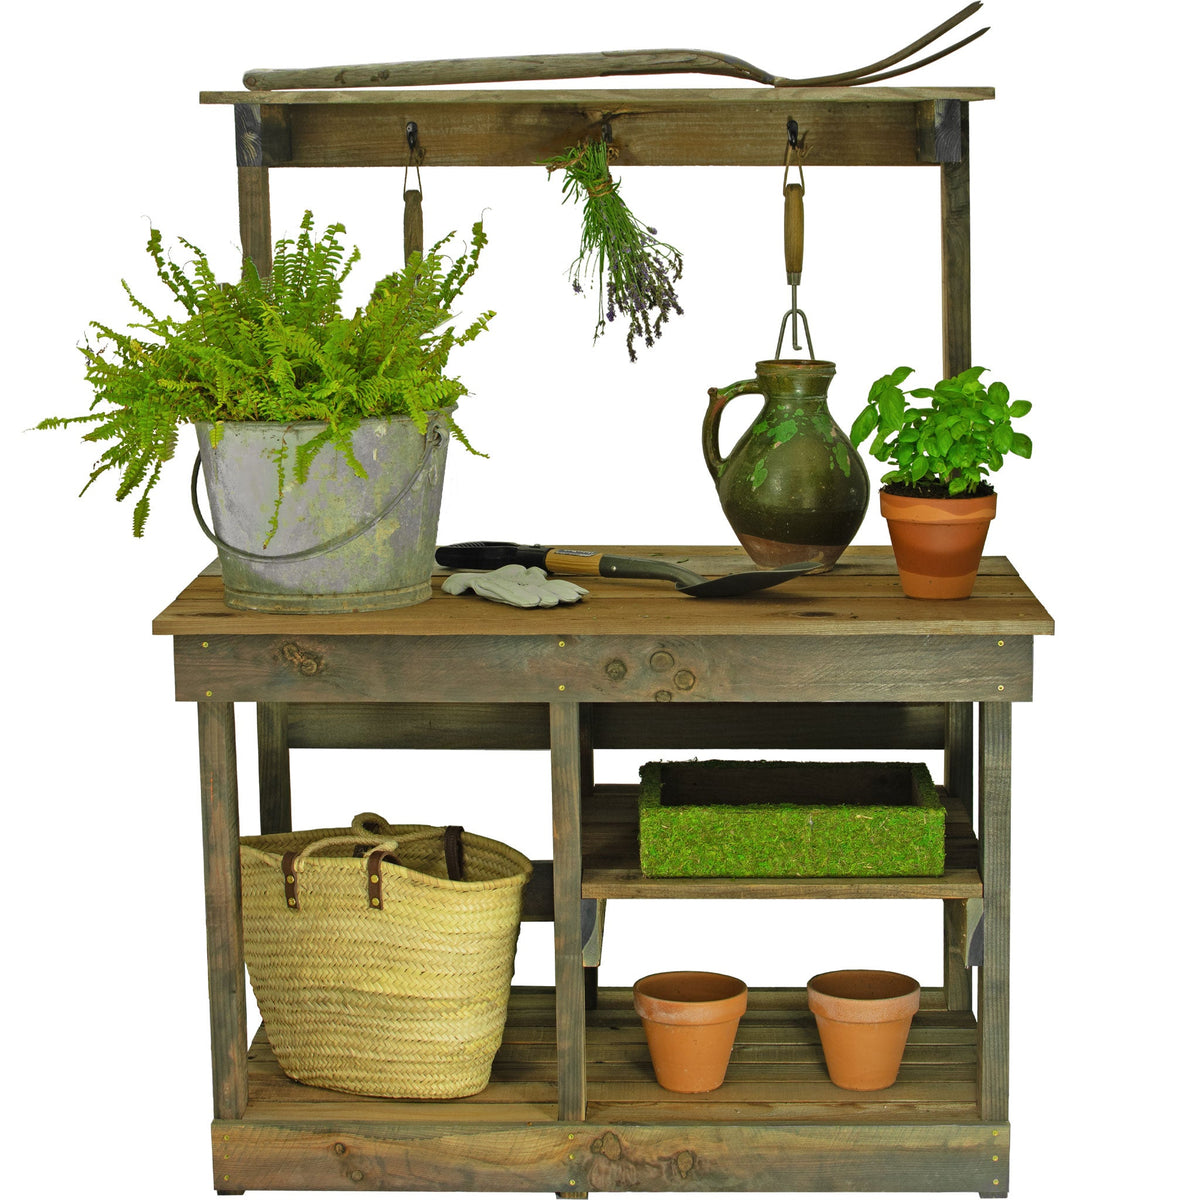 The Rustic Redwood Potting Table and Gardening Workbench with gardening supplies, tools, pots, and plants.